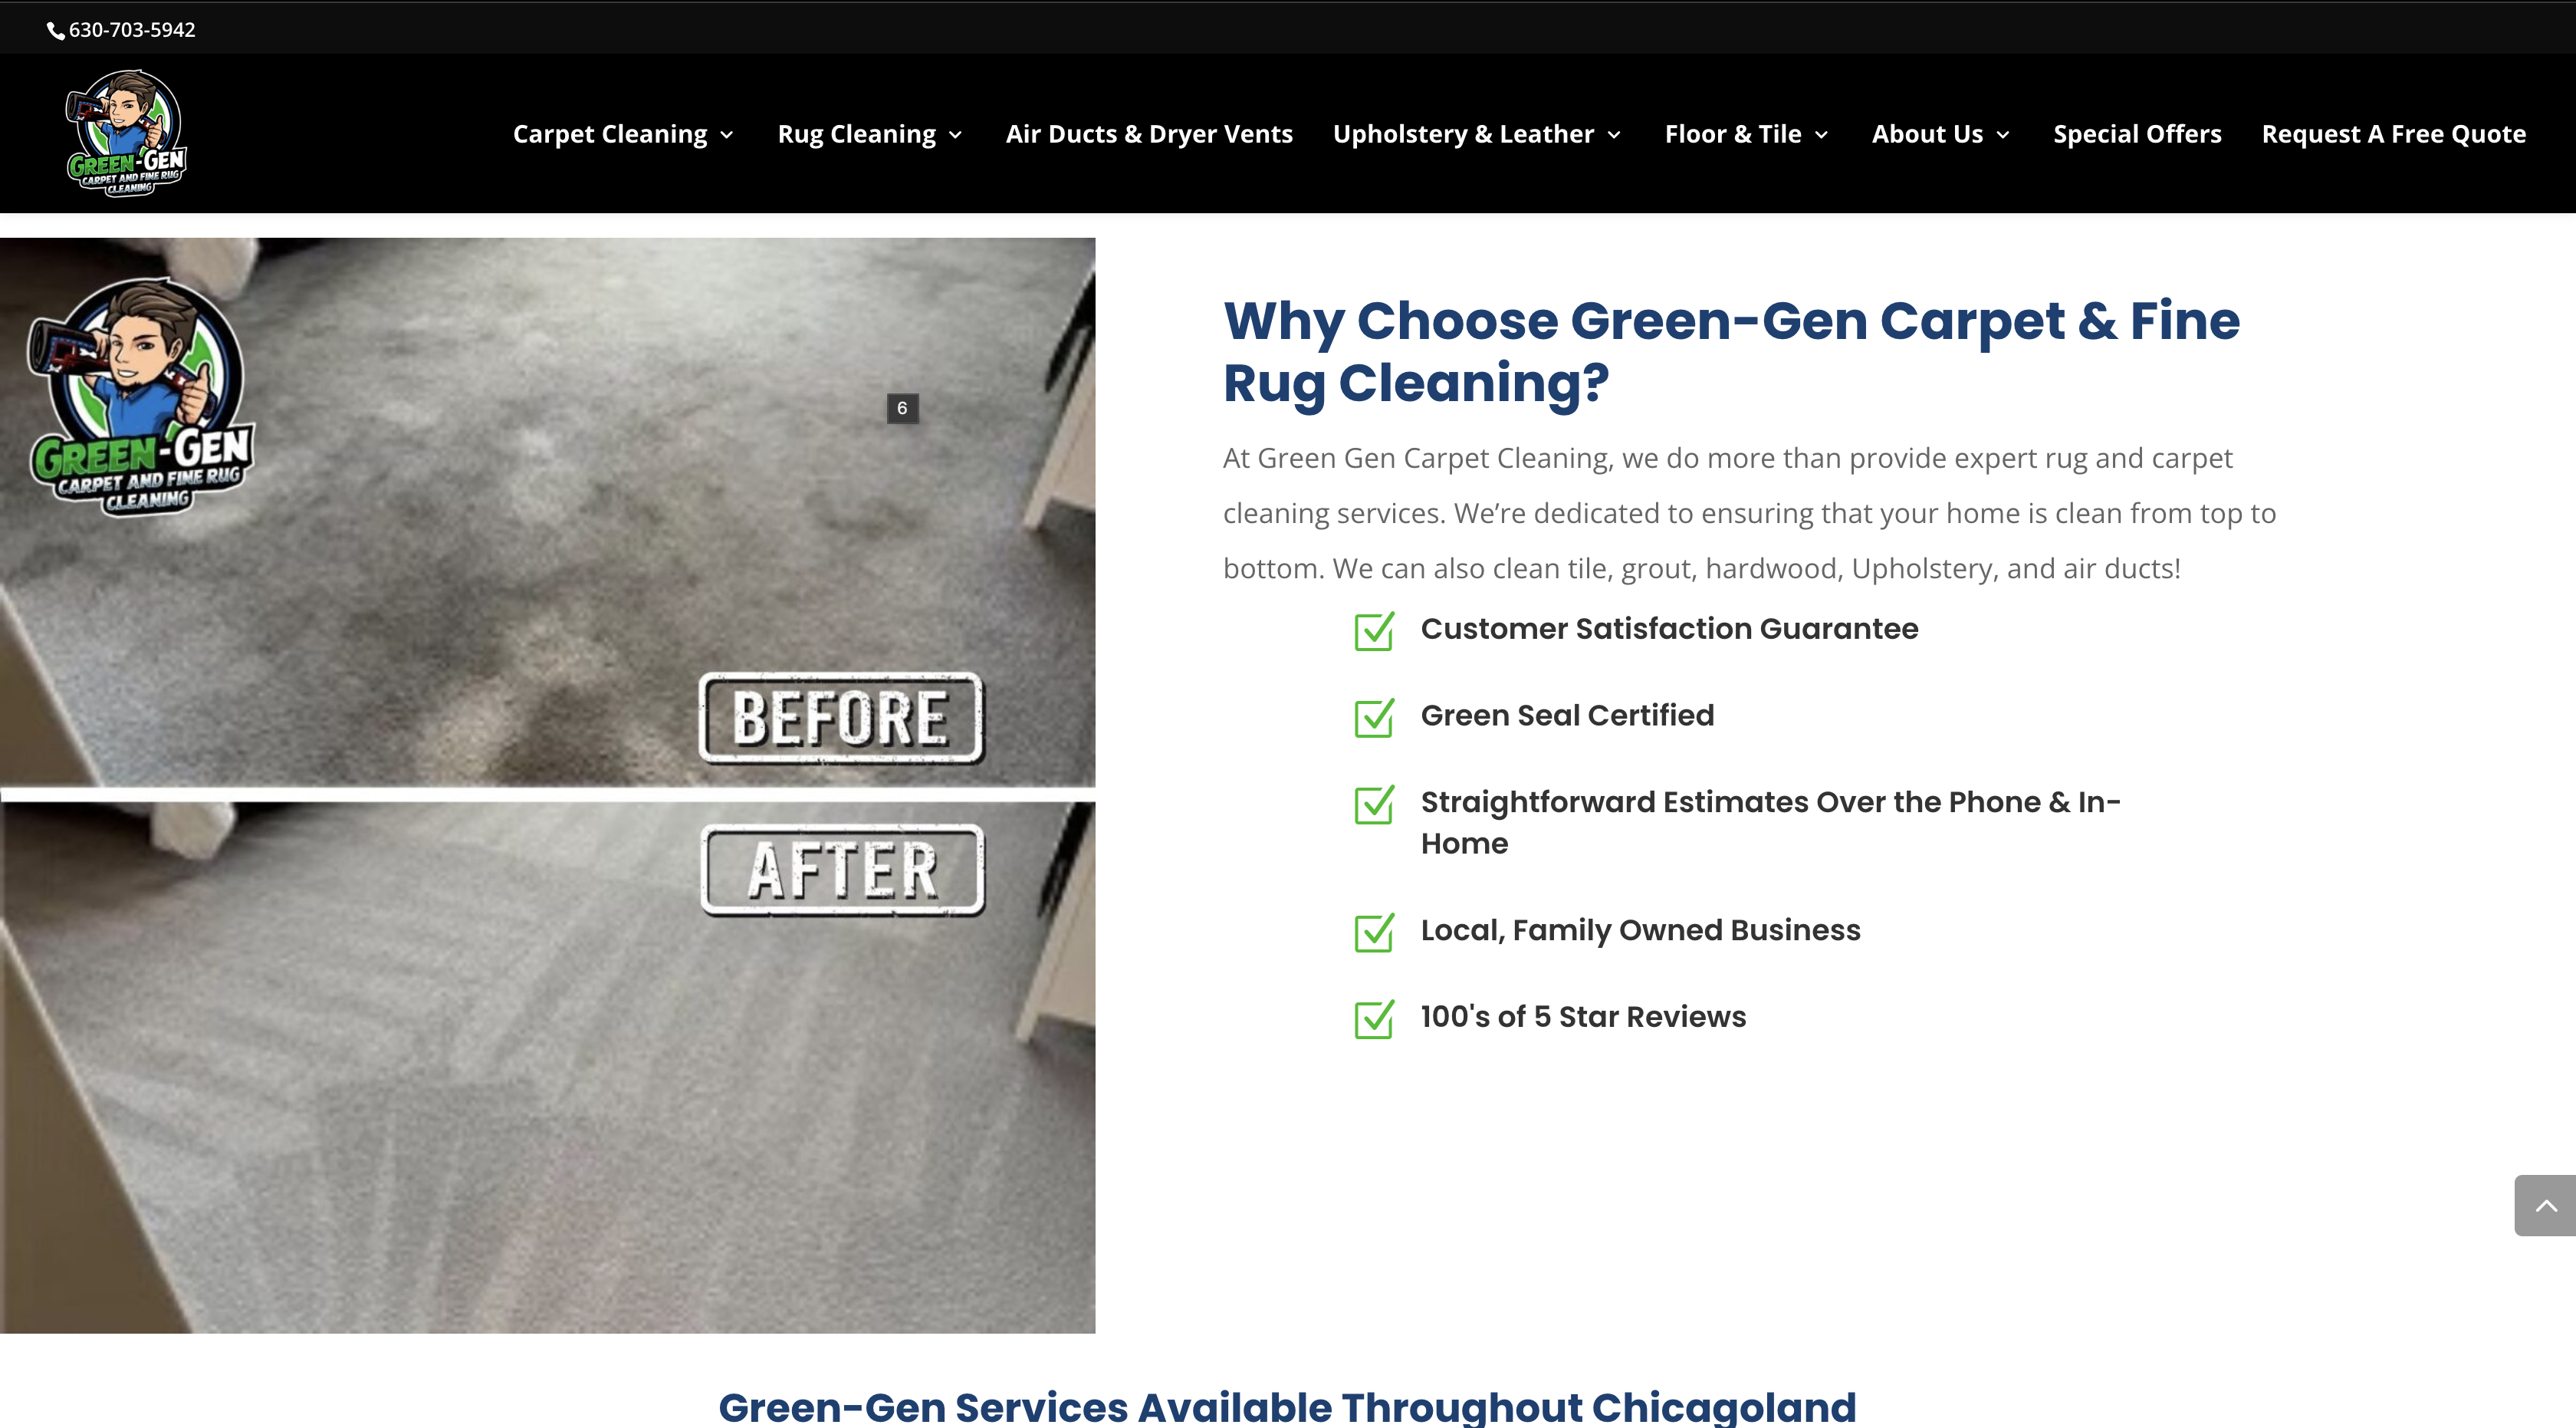 Absolute Best Cleaning Services Carpet Cleaning Page